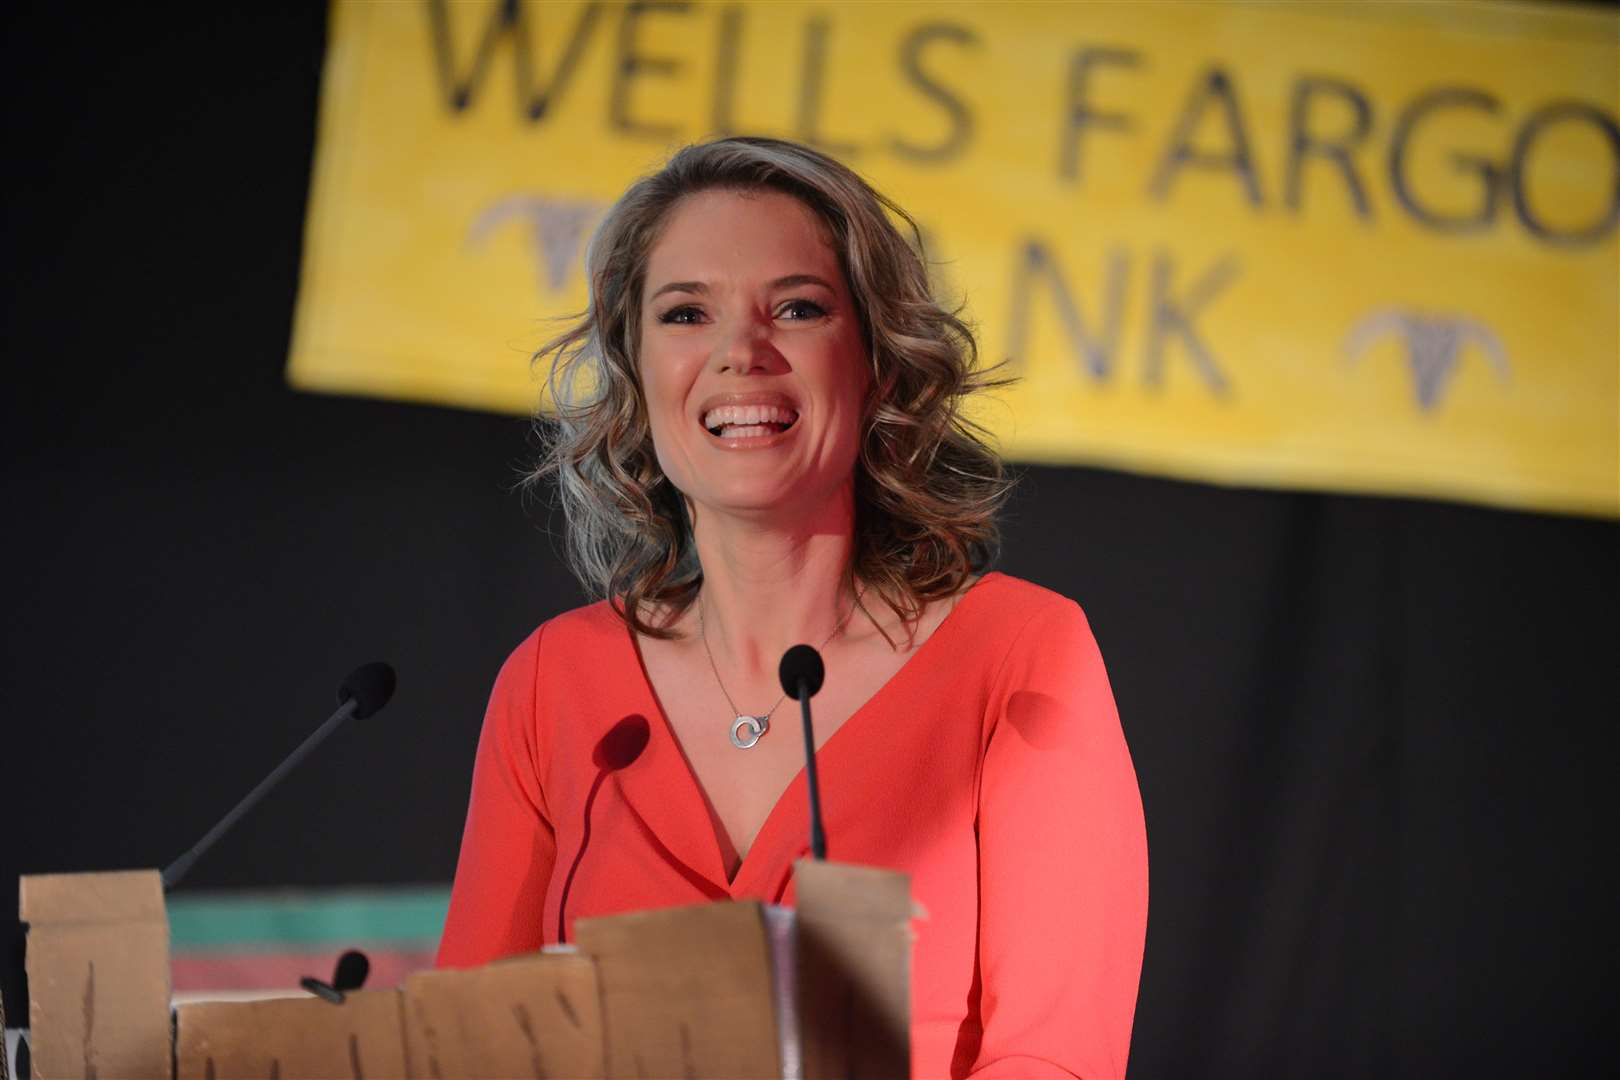 Charlotte Hawkins from Good Morning Britain will host this year's event